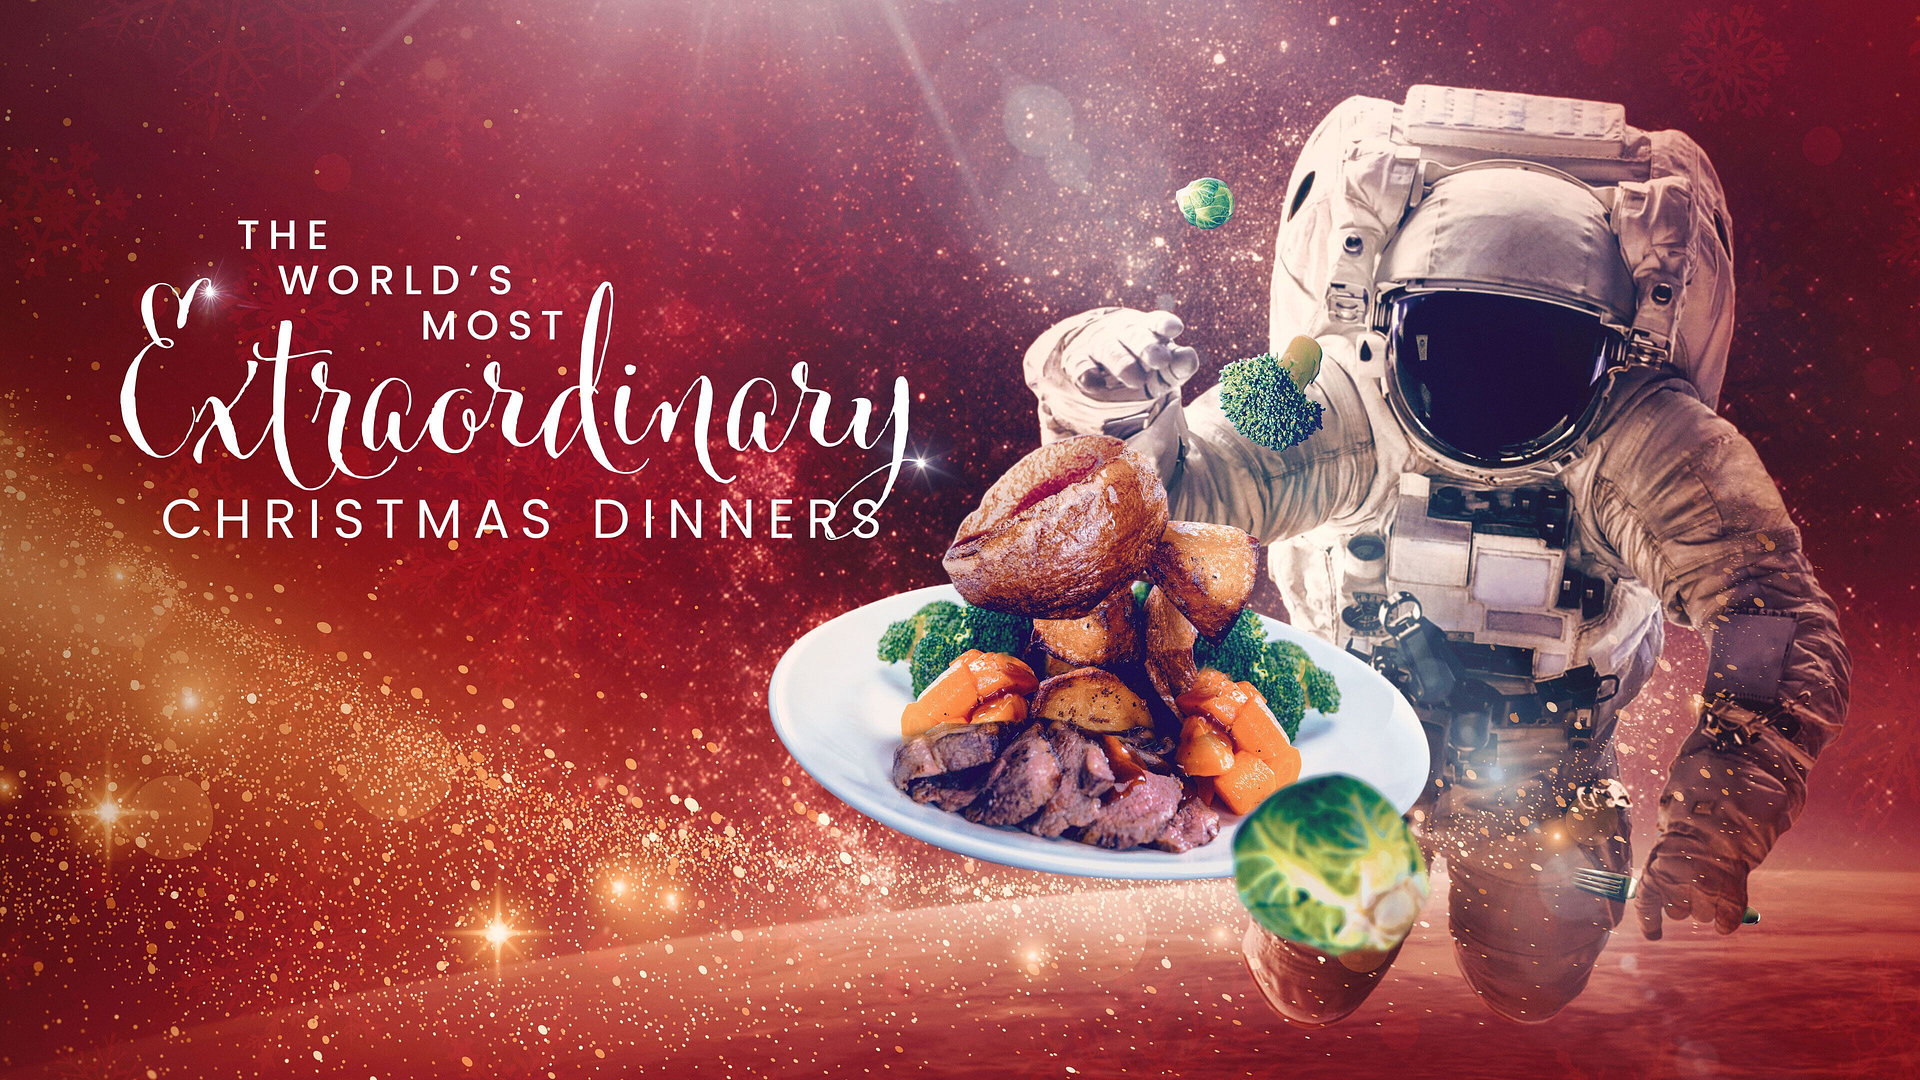 The World's Most Extraordinary Christmas Dinners